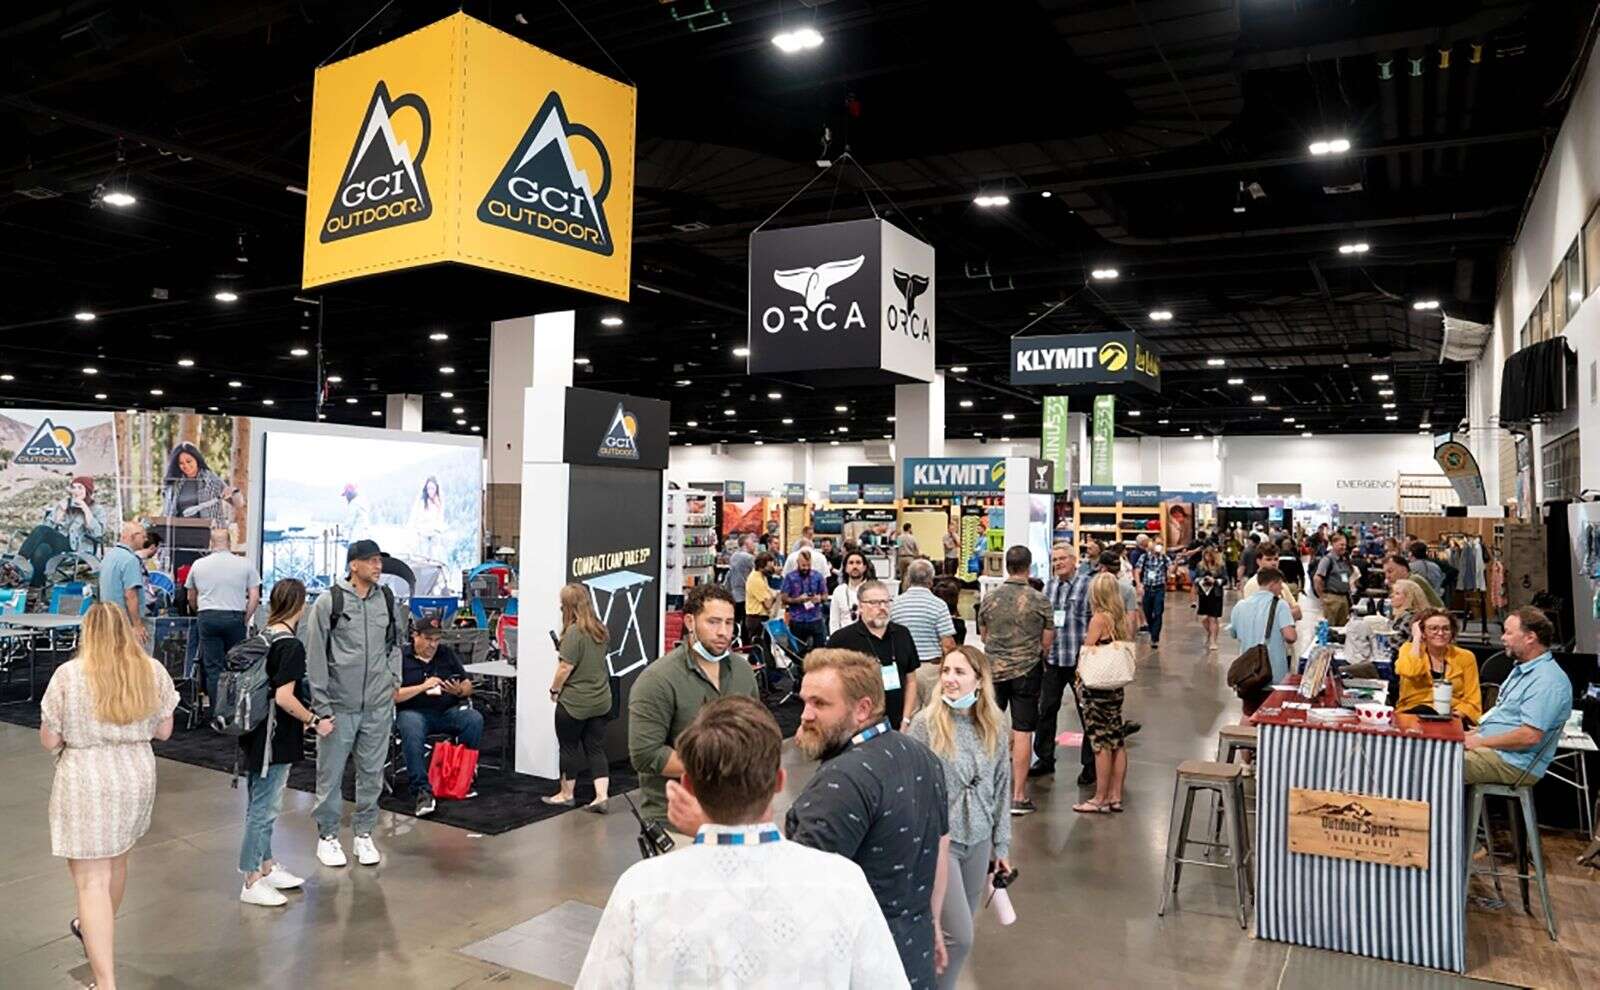 Colorado’s outdoor industry rallies to keep trade show in Denver The